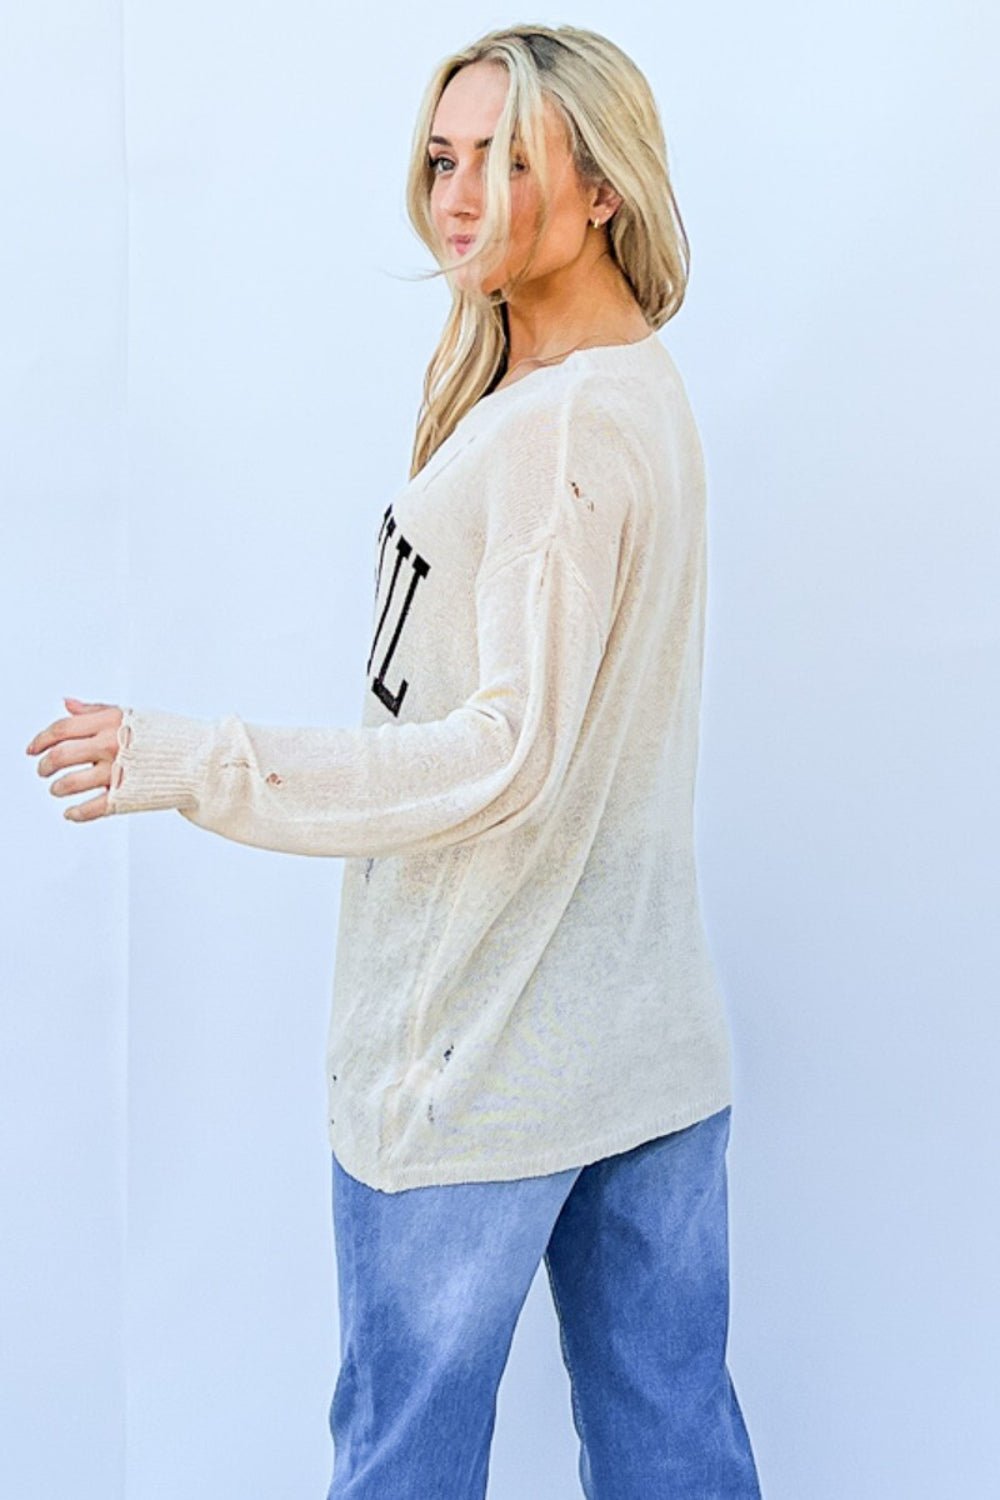 GRATEFUL Distressed Long Sleeve Graphic Knit Top in BeigeTopAnd the Why